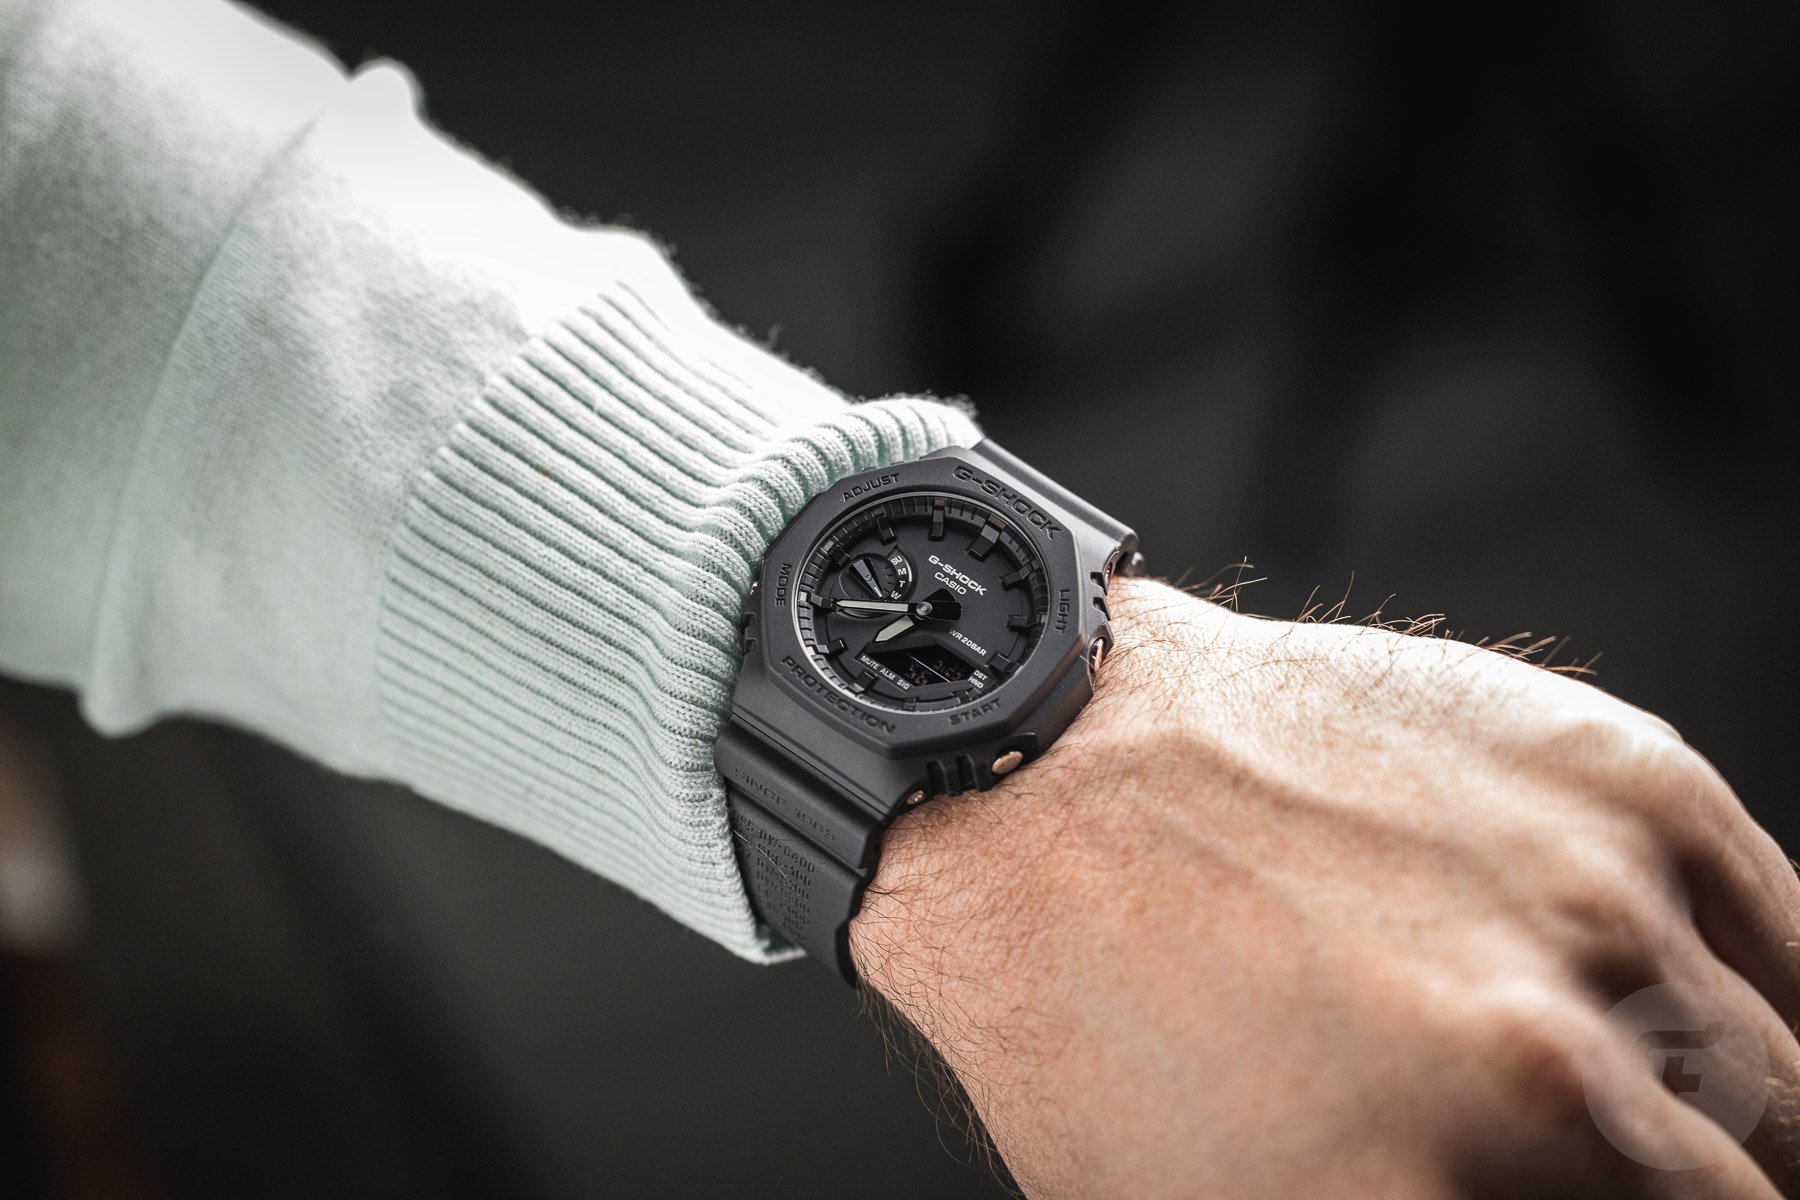 F Hands On: The New Casio G Shock Remaster Black Series